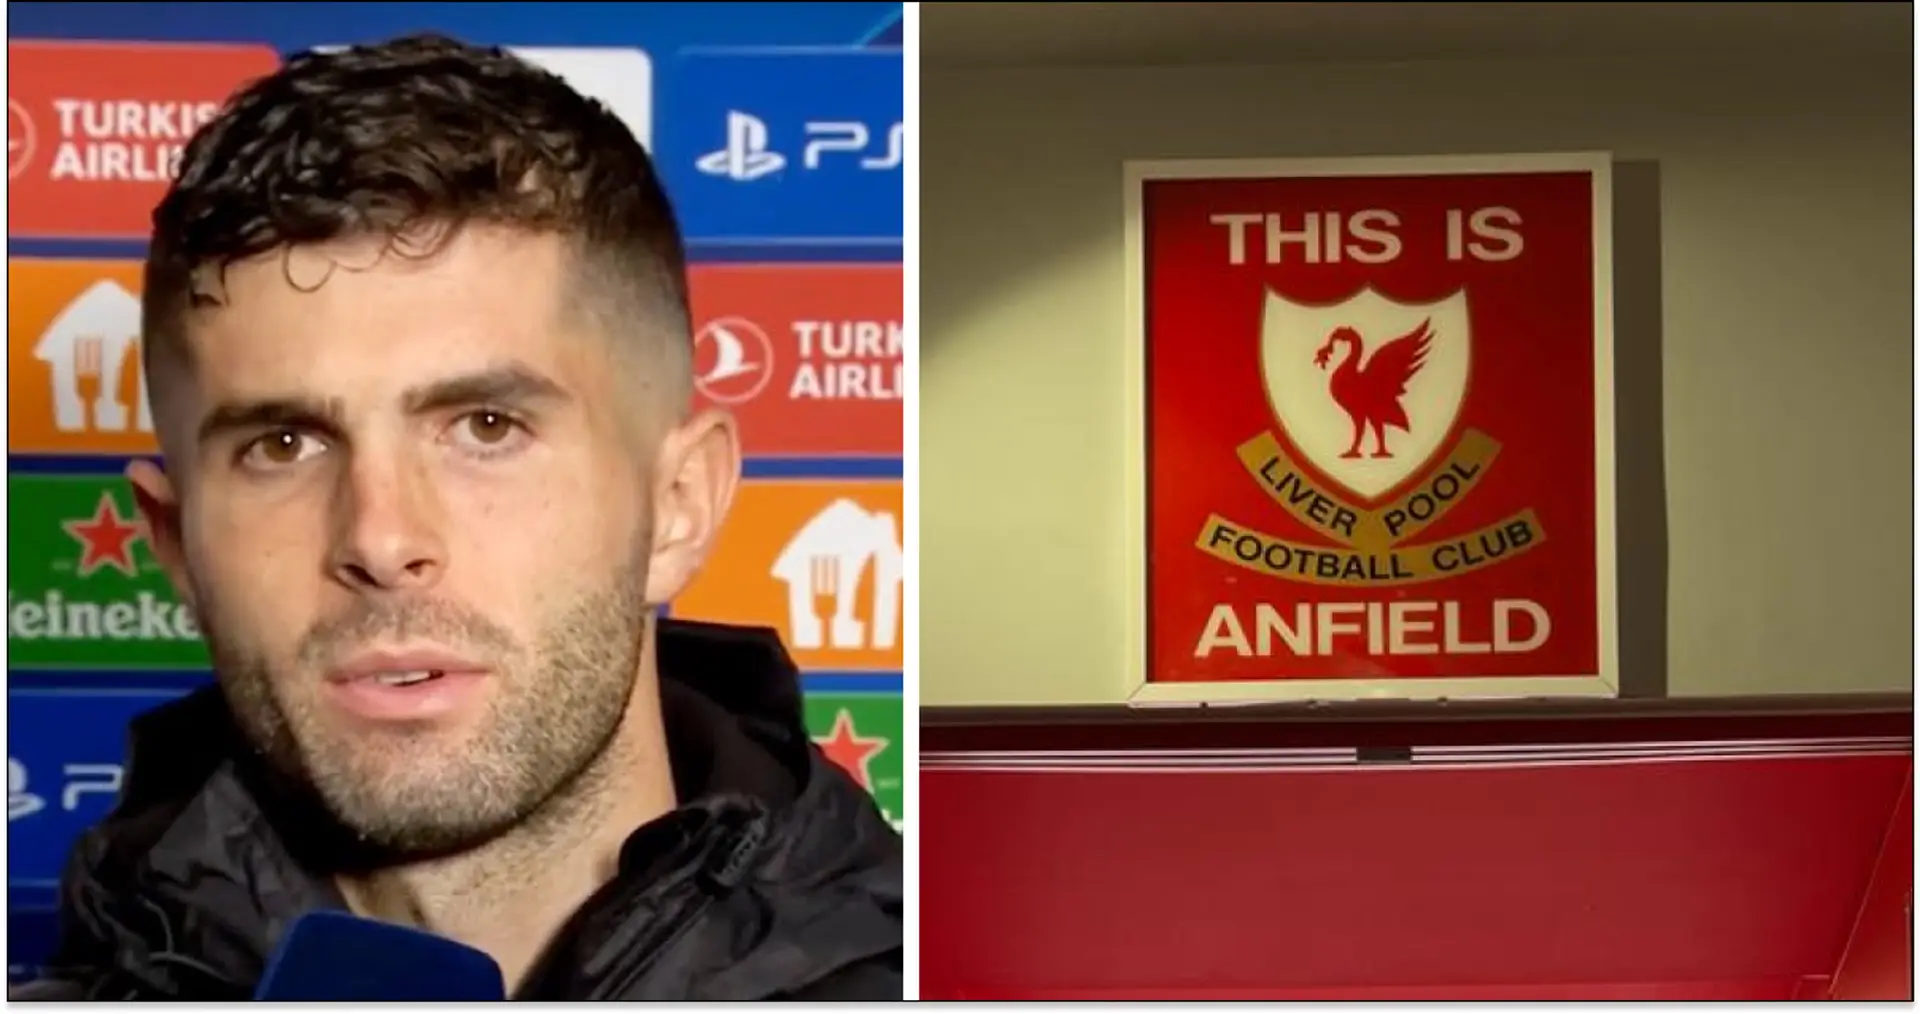 Confirmed: American star to play at Anfield in 2024 — not Pulisic 😂